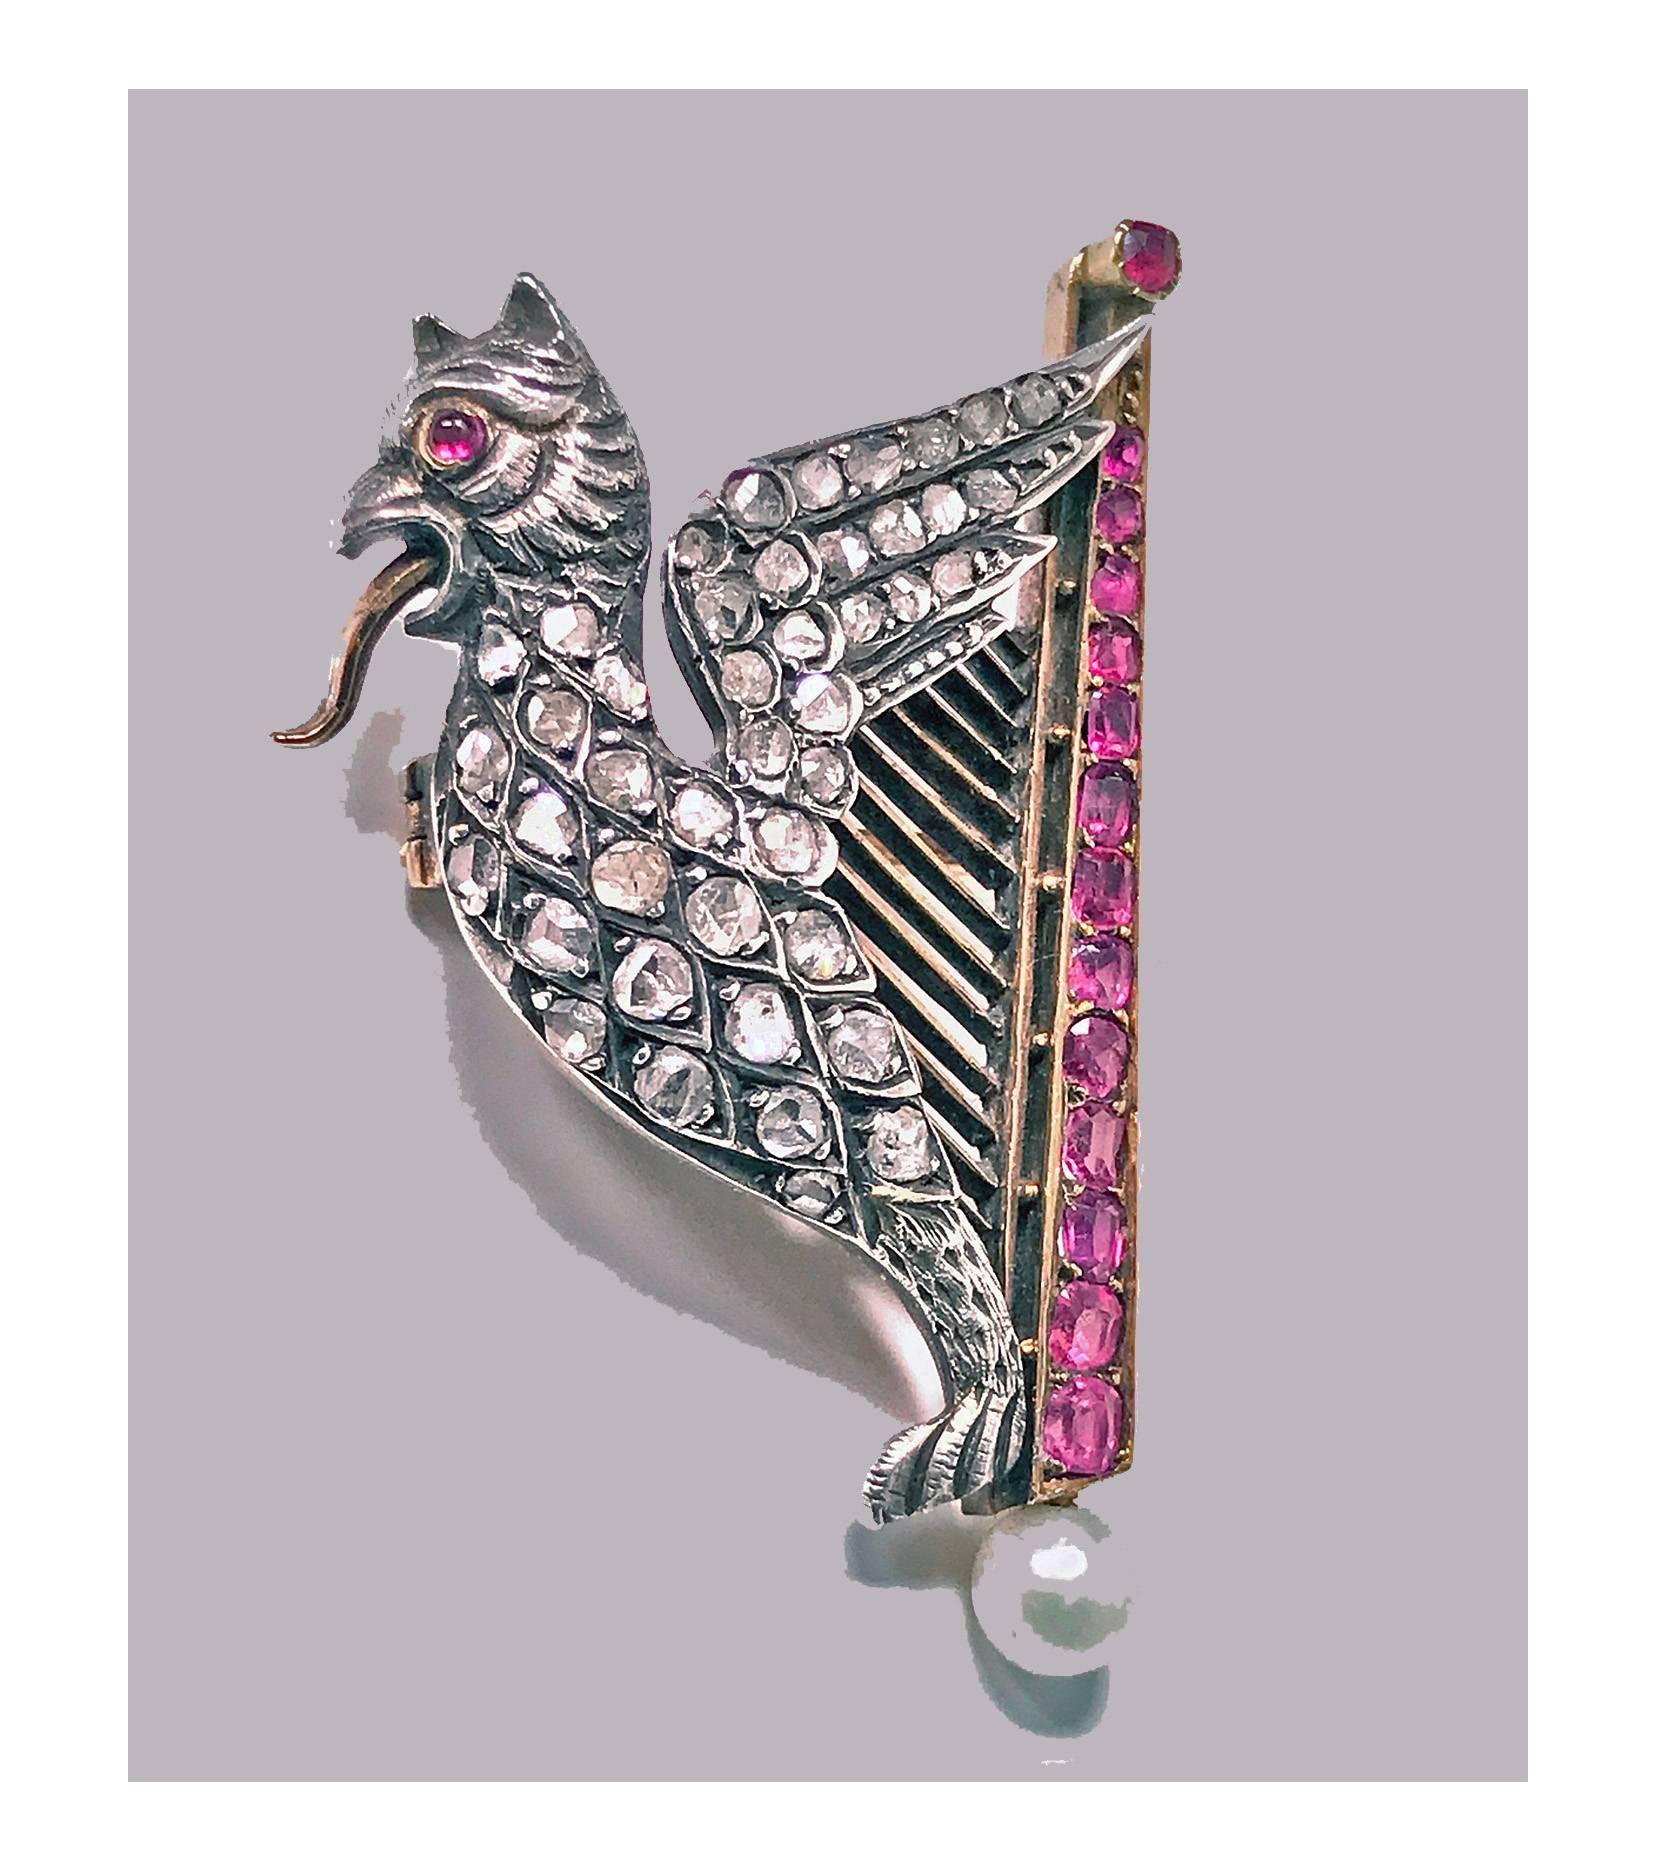 Mythical 19th Century Griffin and Lyre Ruby, Diamond, Pearl Gold Brooch, French C.1890. The winged griffin and harp brooch set in silver and 18K Gold (tested). The tongue protruding griffin set with 43 small rose cut diamonds and cabochon ruby eye,